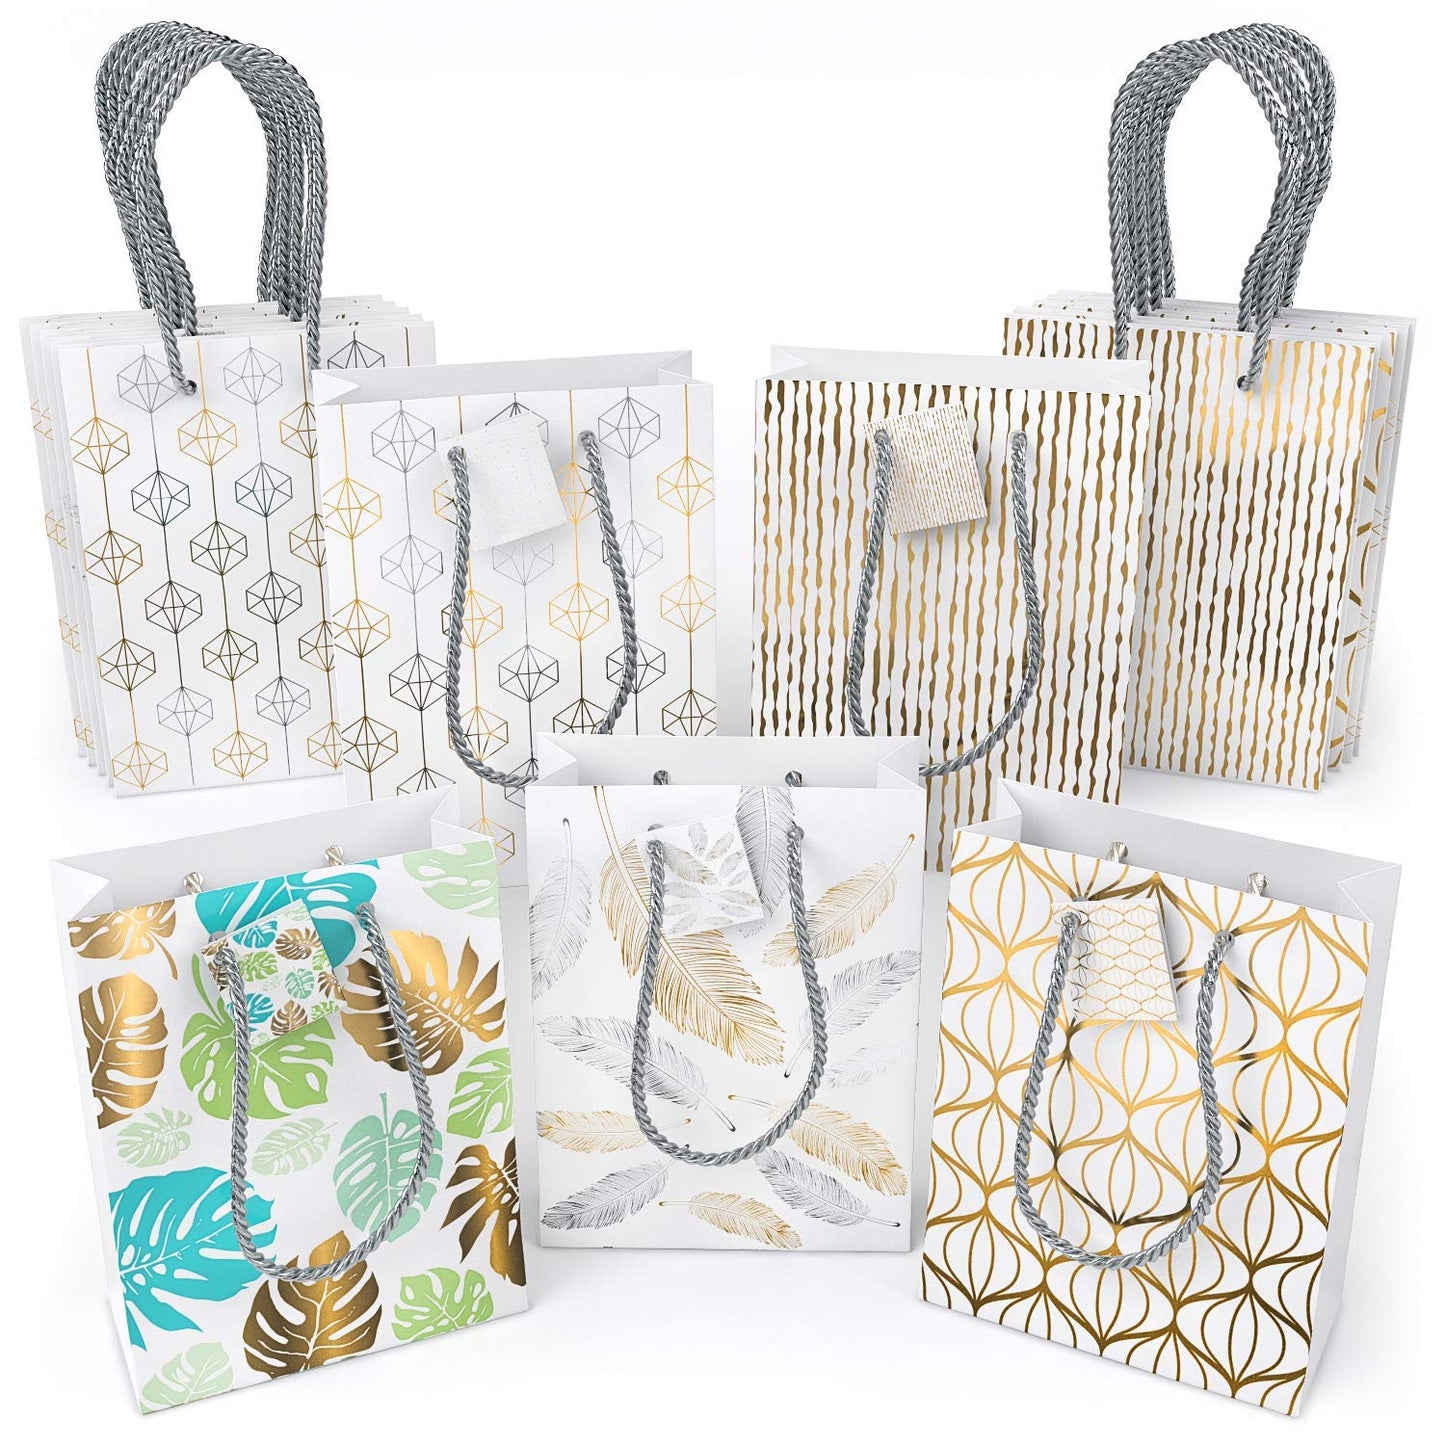 Arteza Gift Bags, White with Assorted Designs - Set of 15